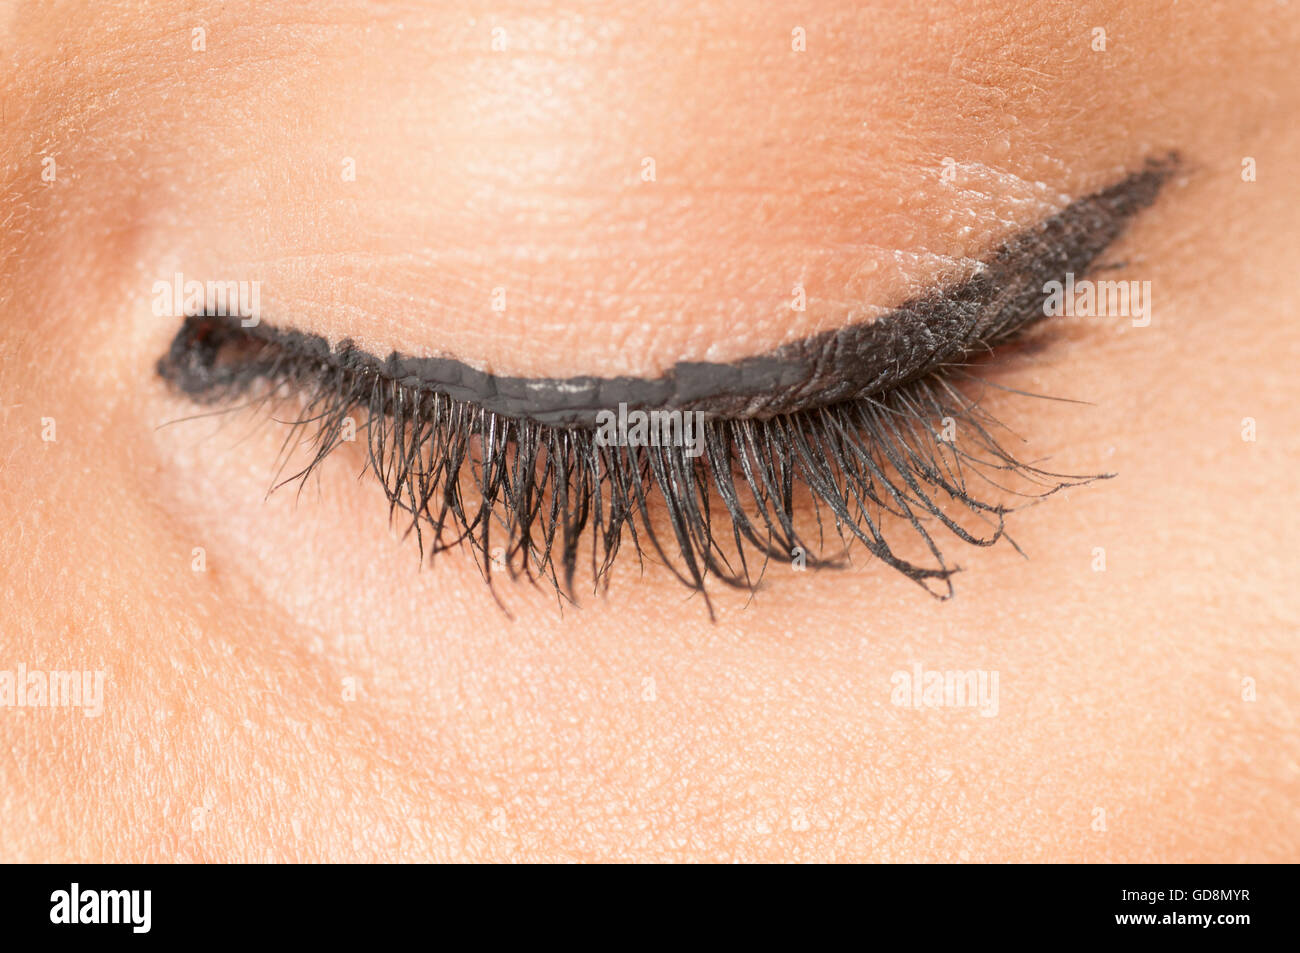 Close up of a woman's eye wearing eyeliner Stock Photo